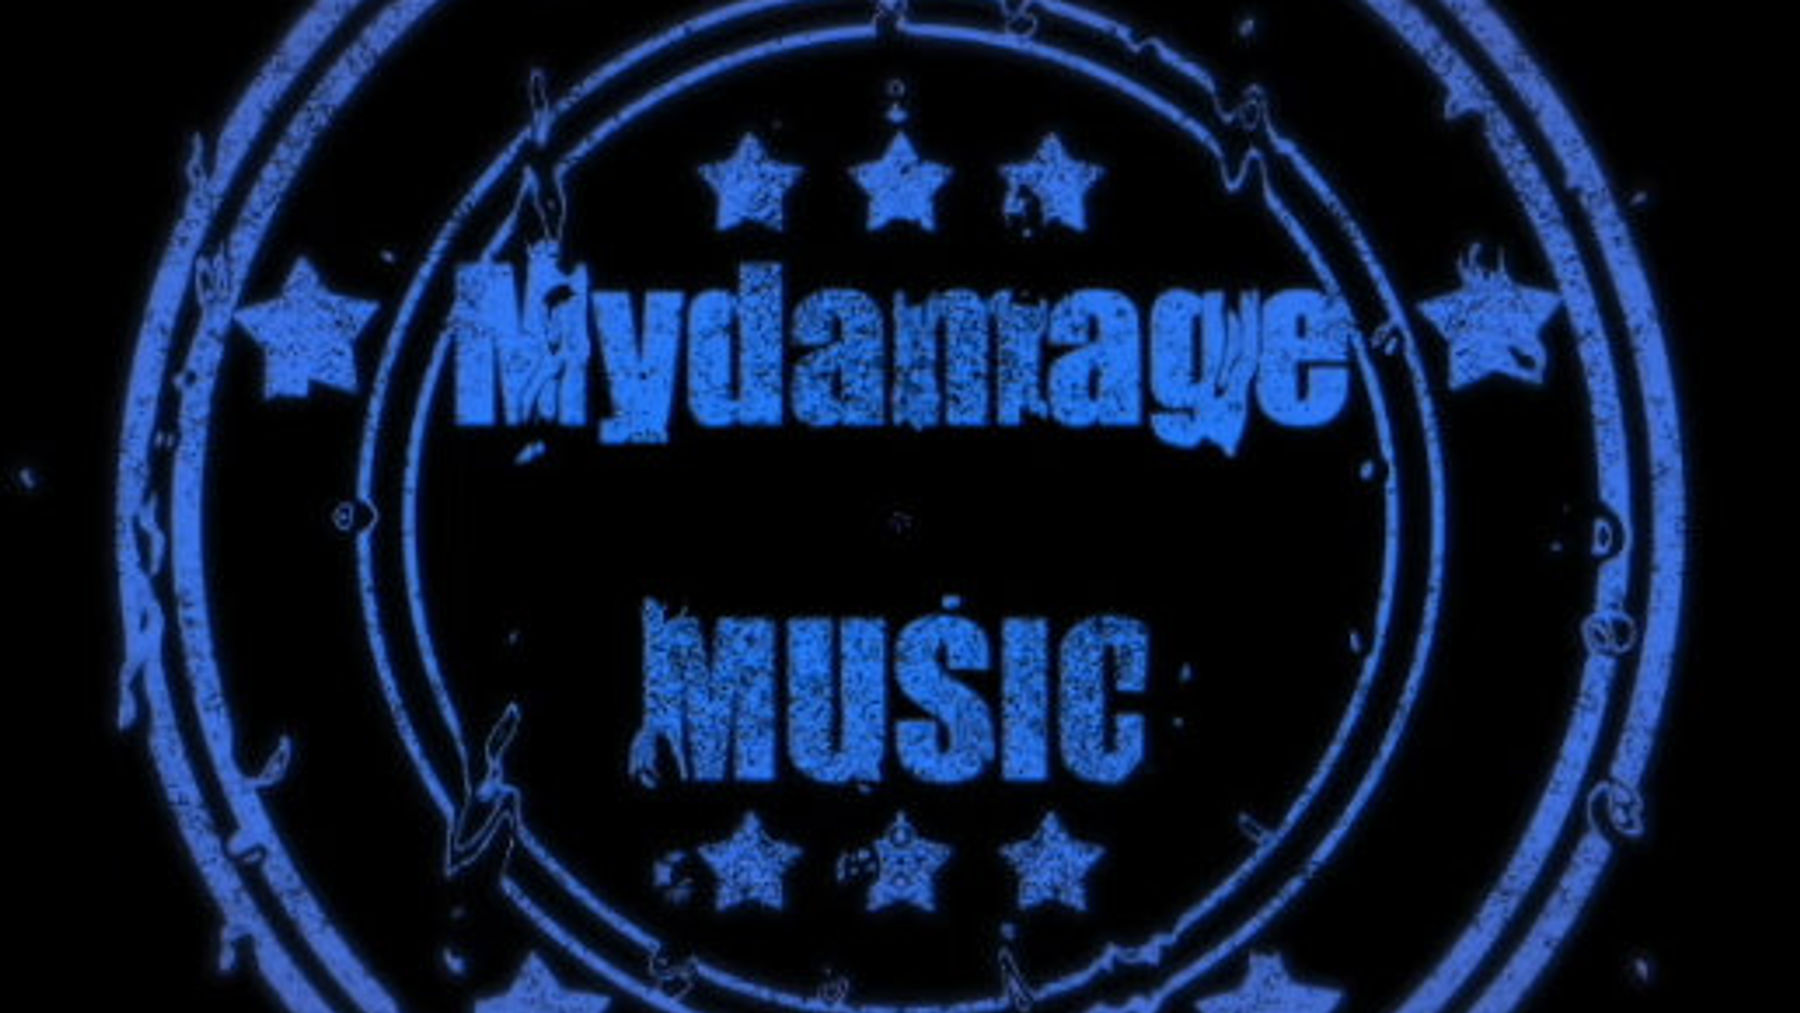 Mydamage Music Cover Band demo/live video playlist